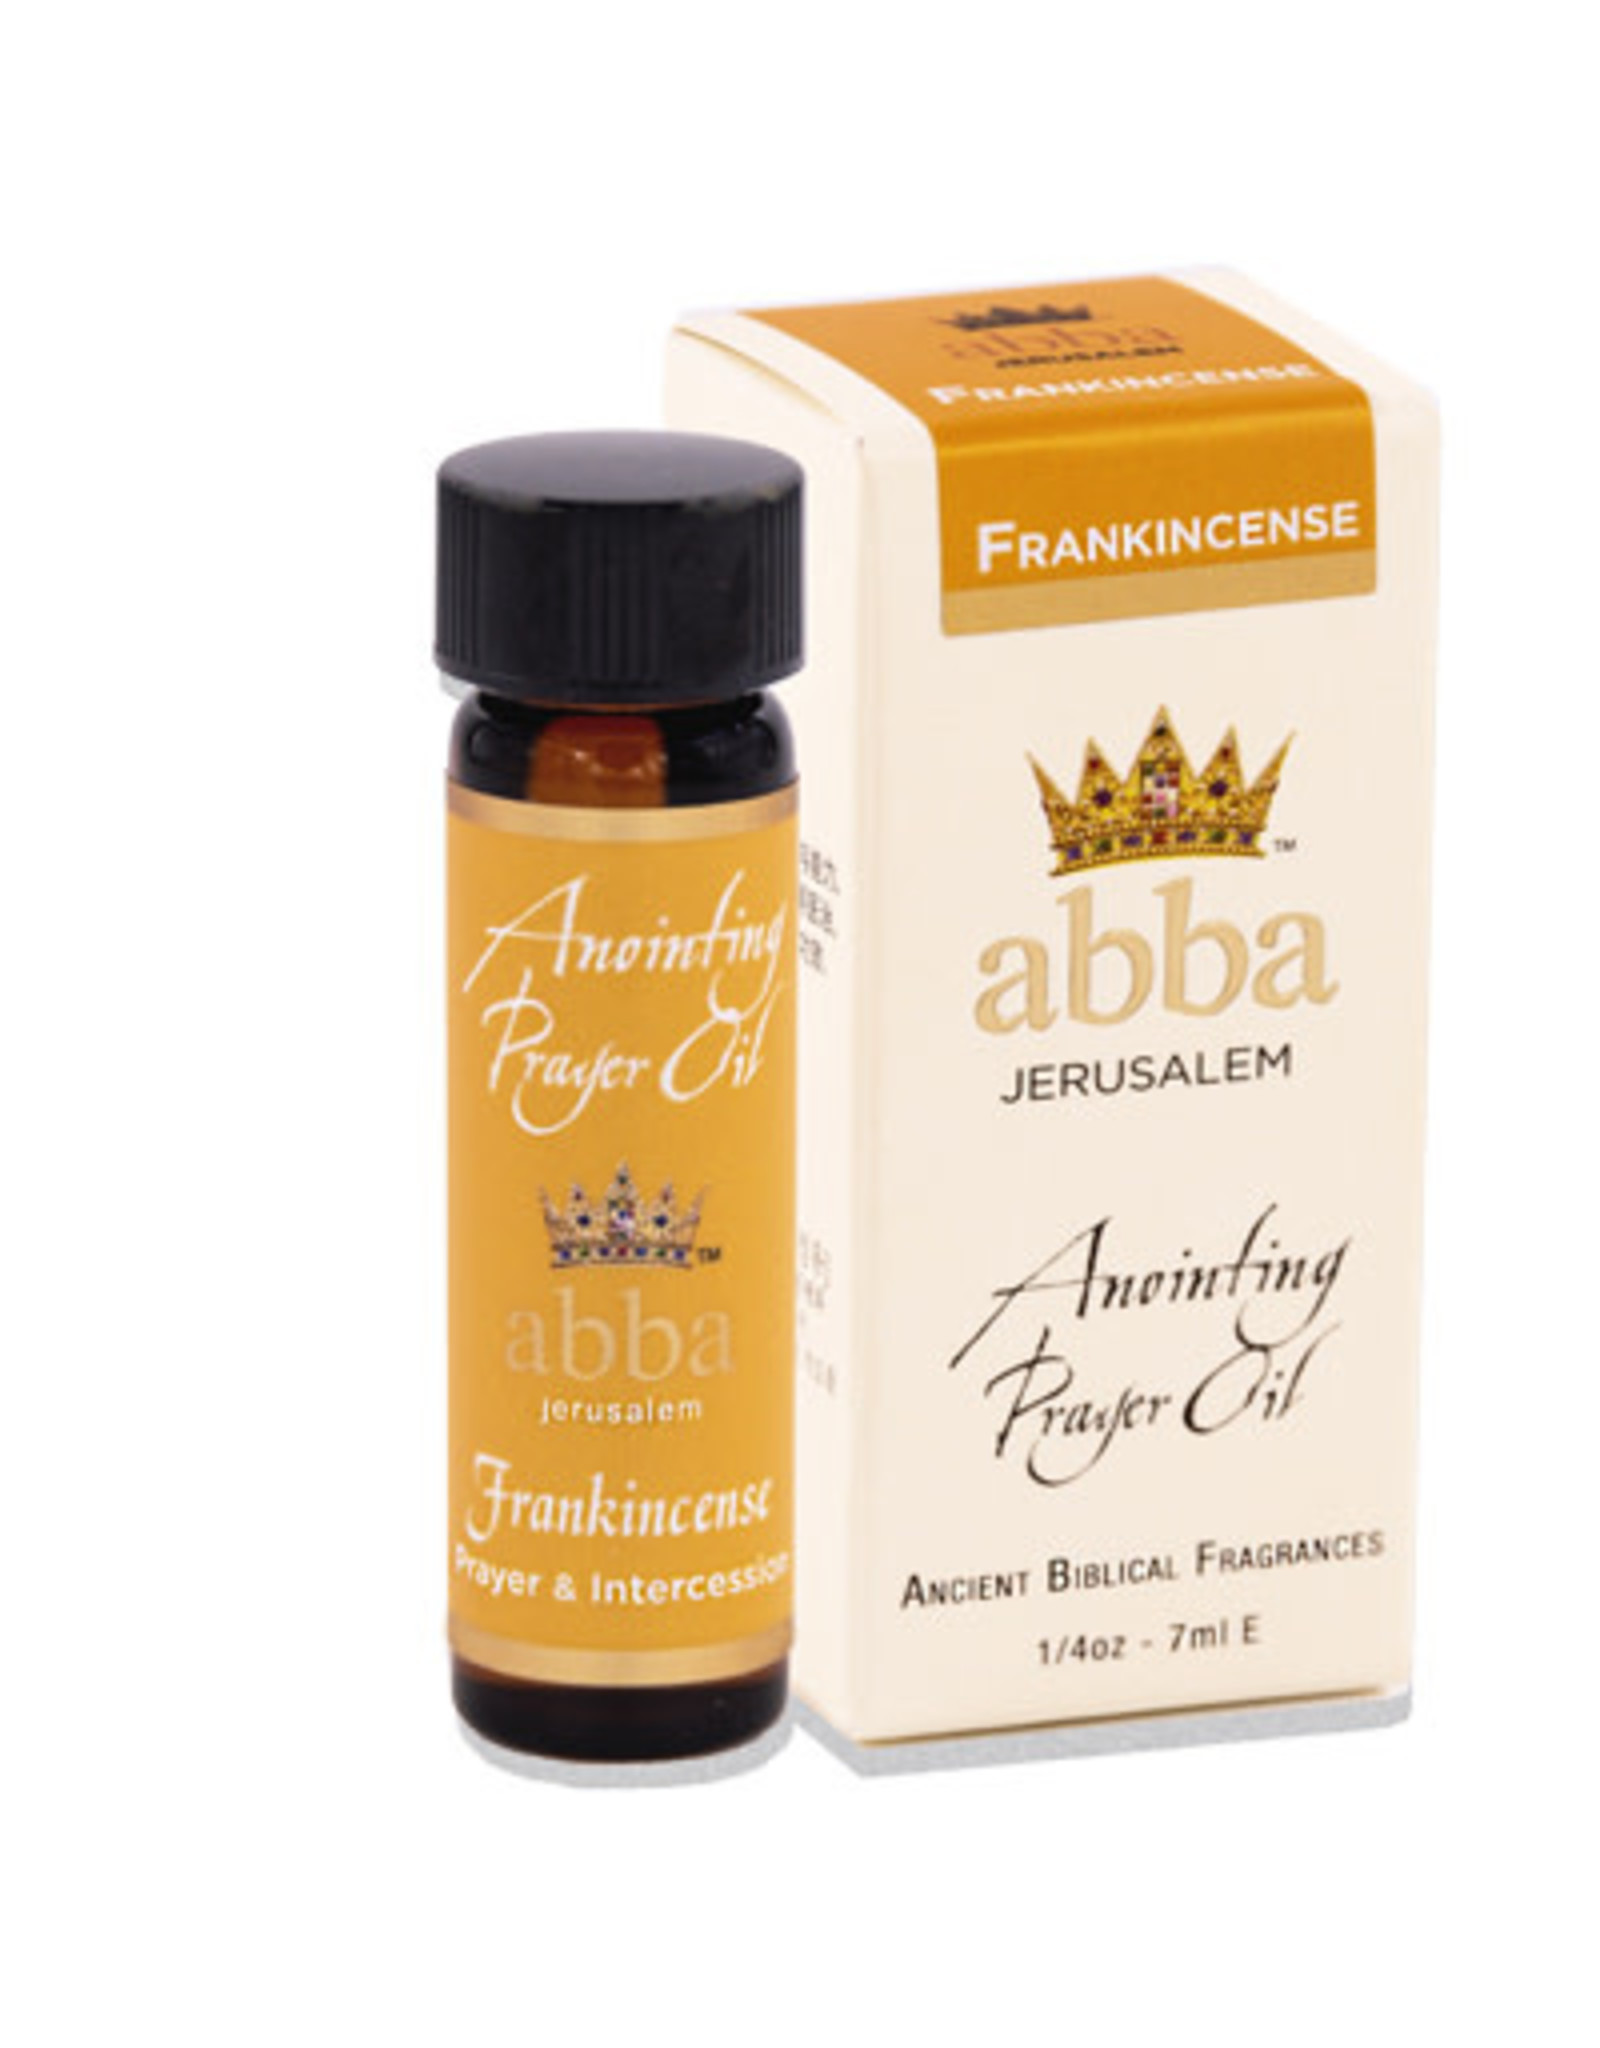 Abba Oil Anointing Oil, Frankincense 0.25 oz